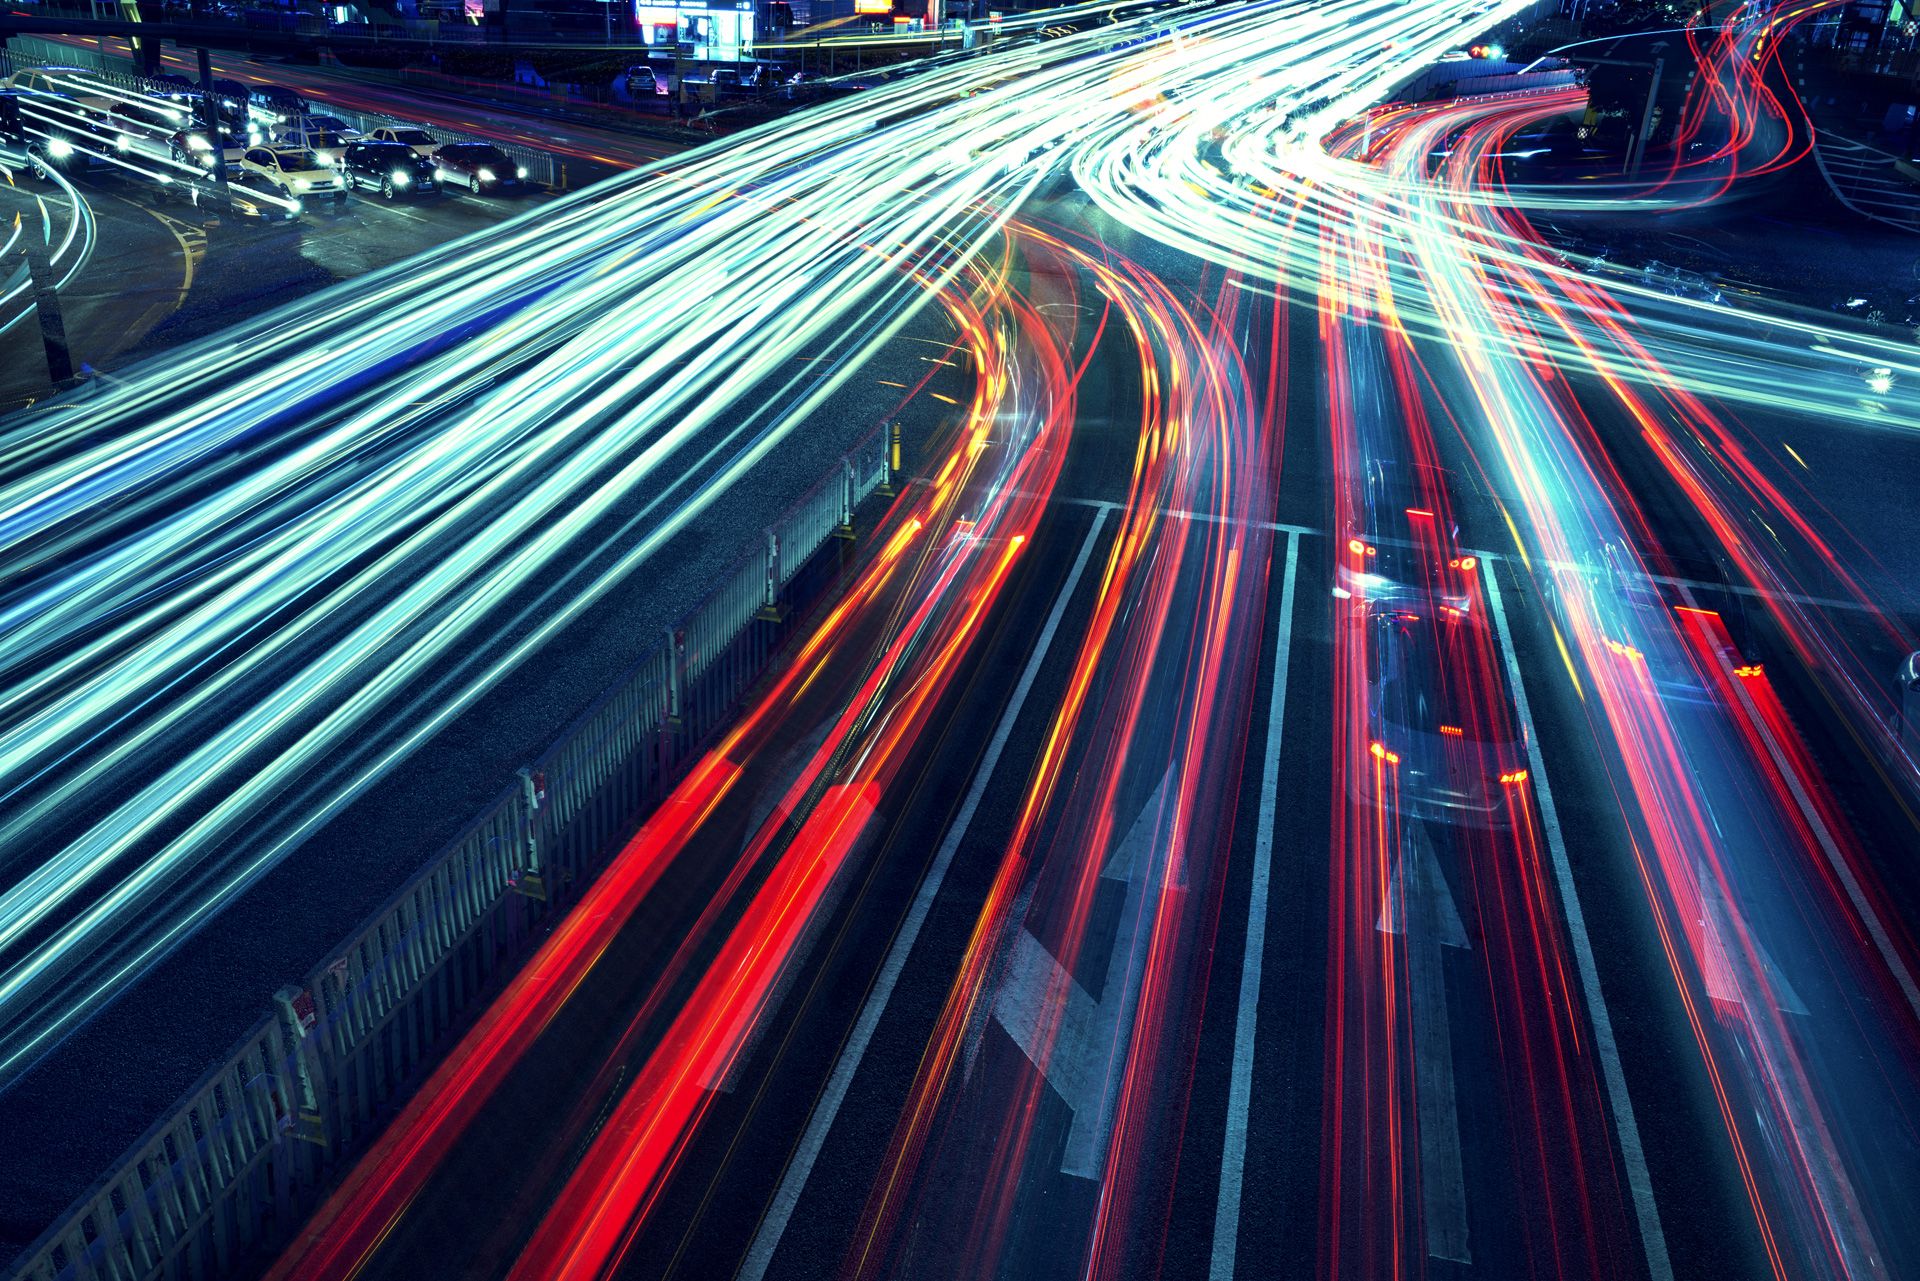 Image of a motorway with a motion blur effect using a slow shutter speed